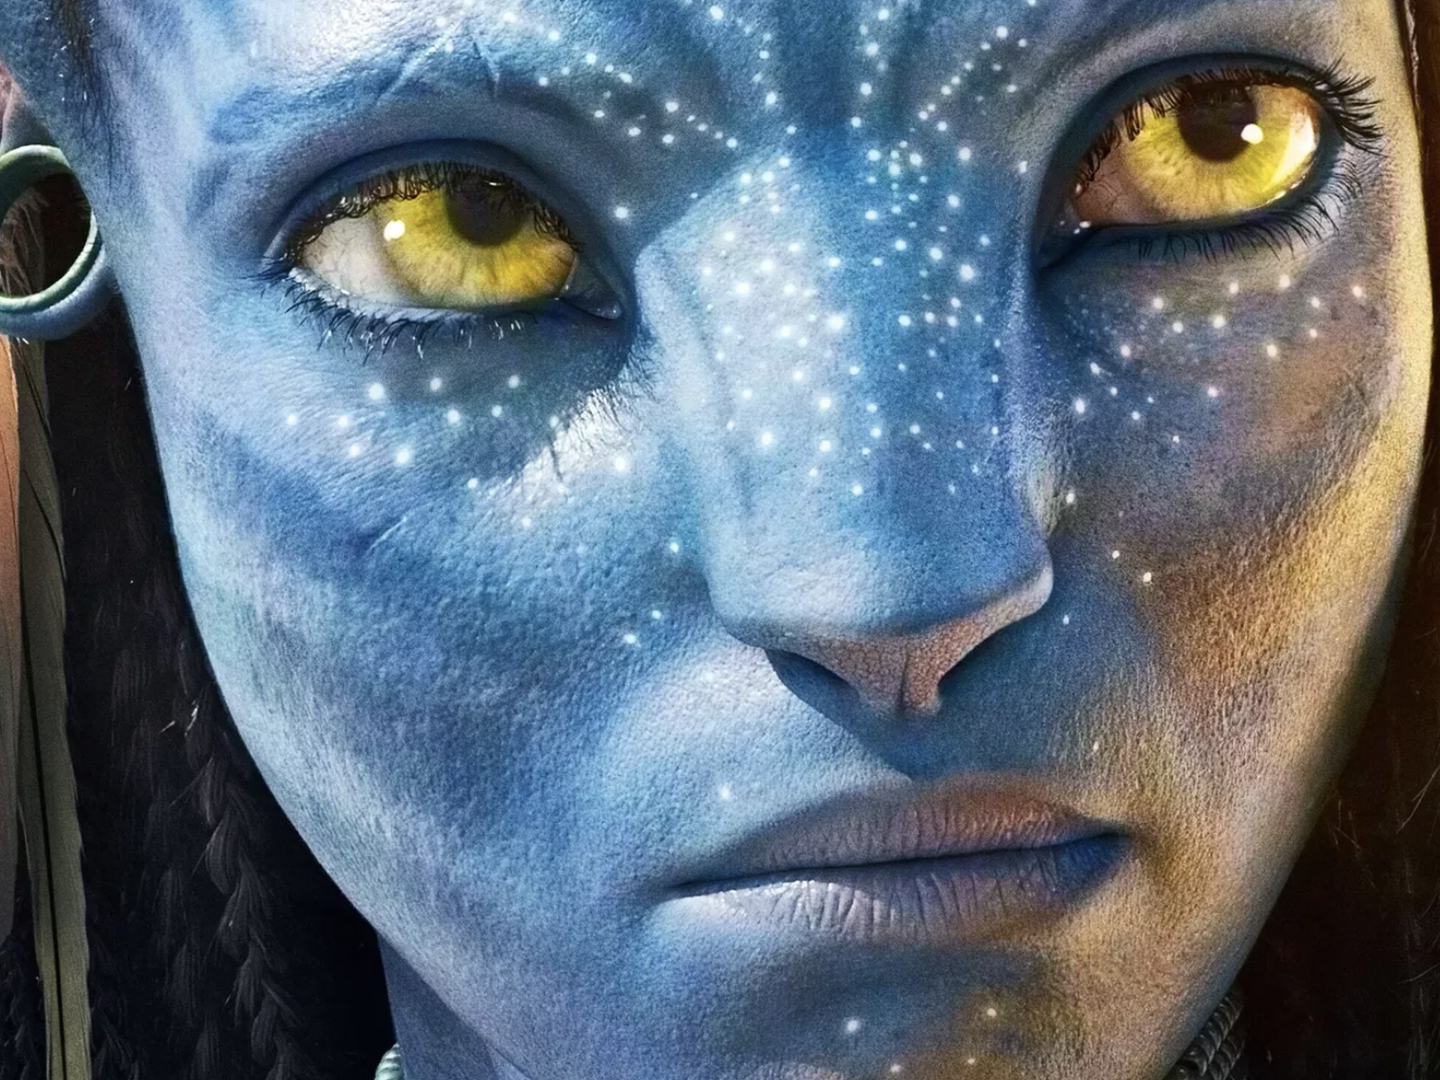 Avatar: The Way of Water' becomes sixth film in history to pass 2